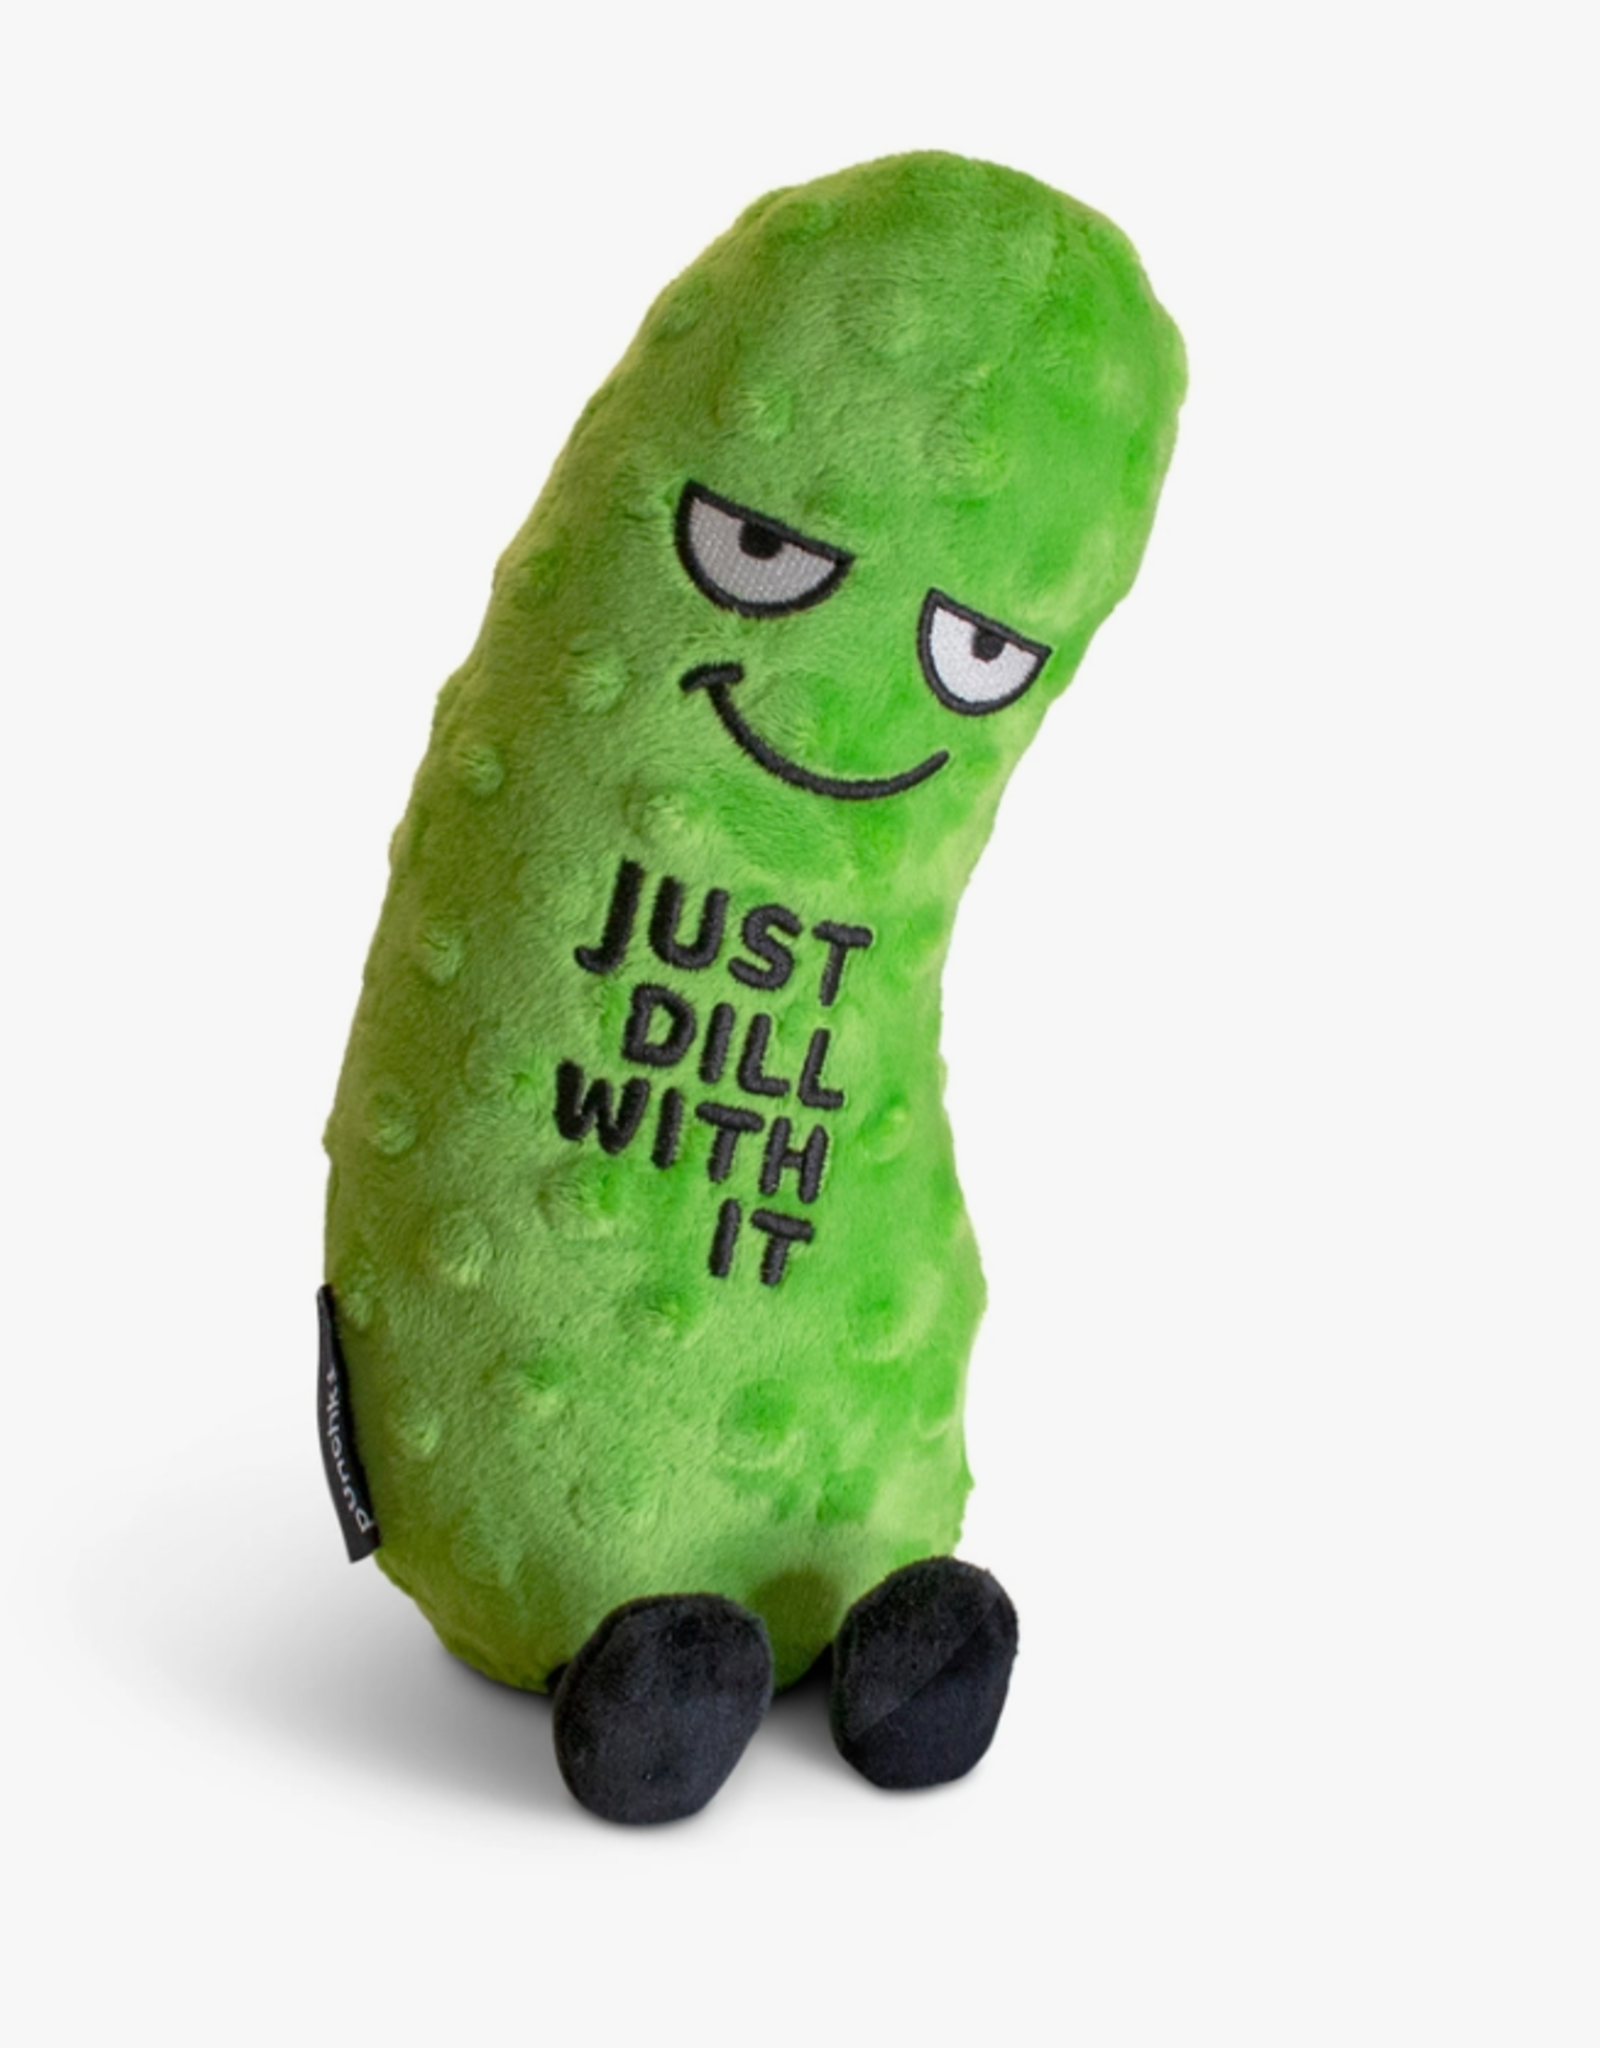 Punchkins Stuffie - Punchkin: Pickle, Just Dill with it